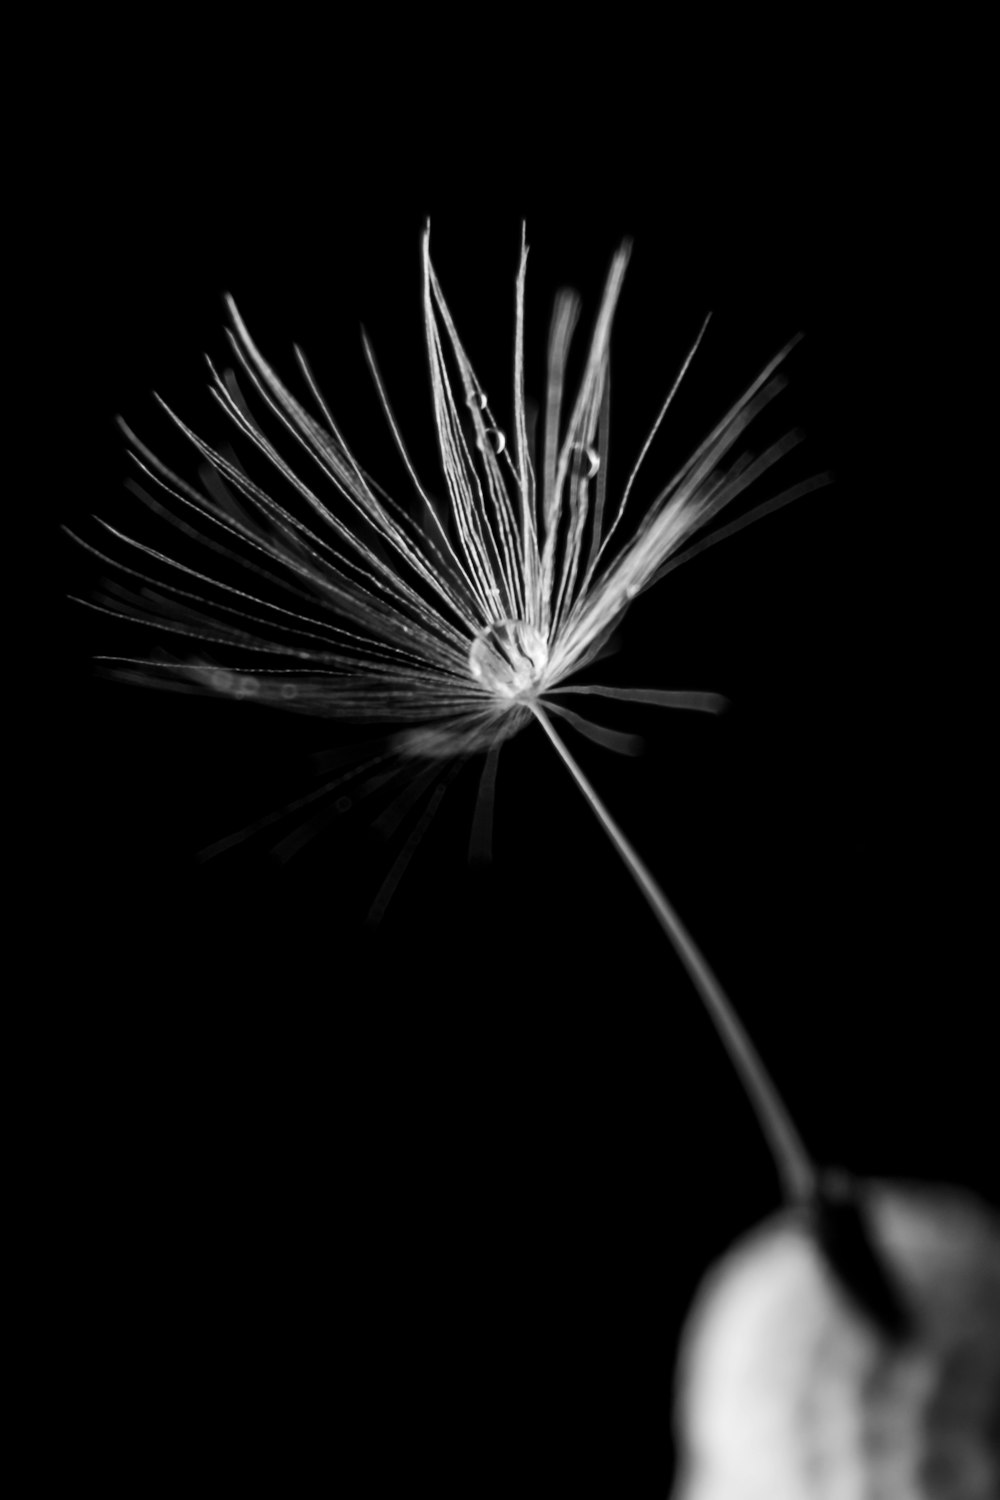 grayscale photography of dandelion flower